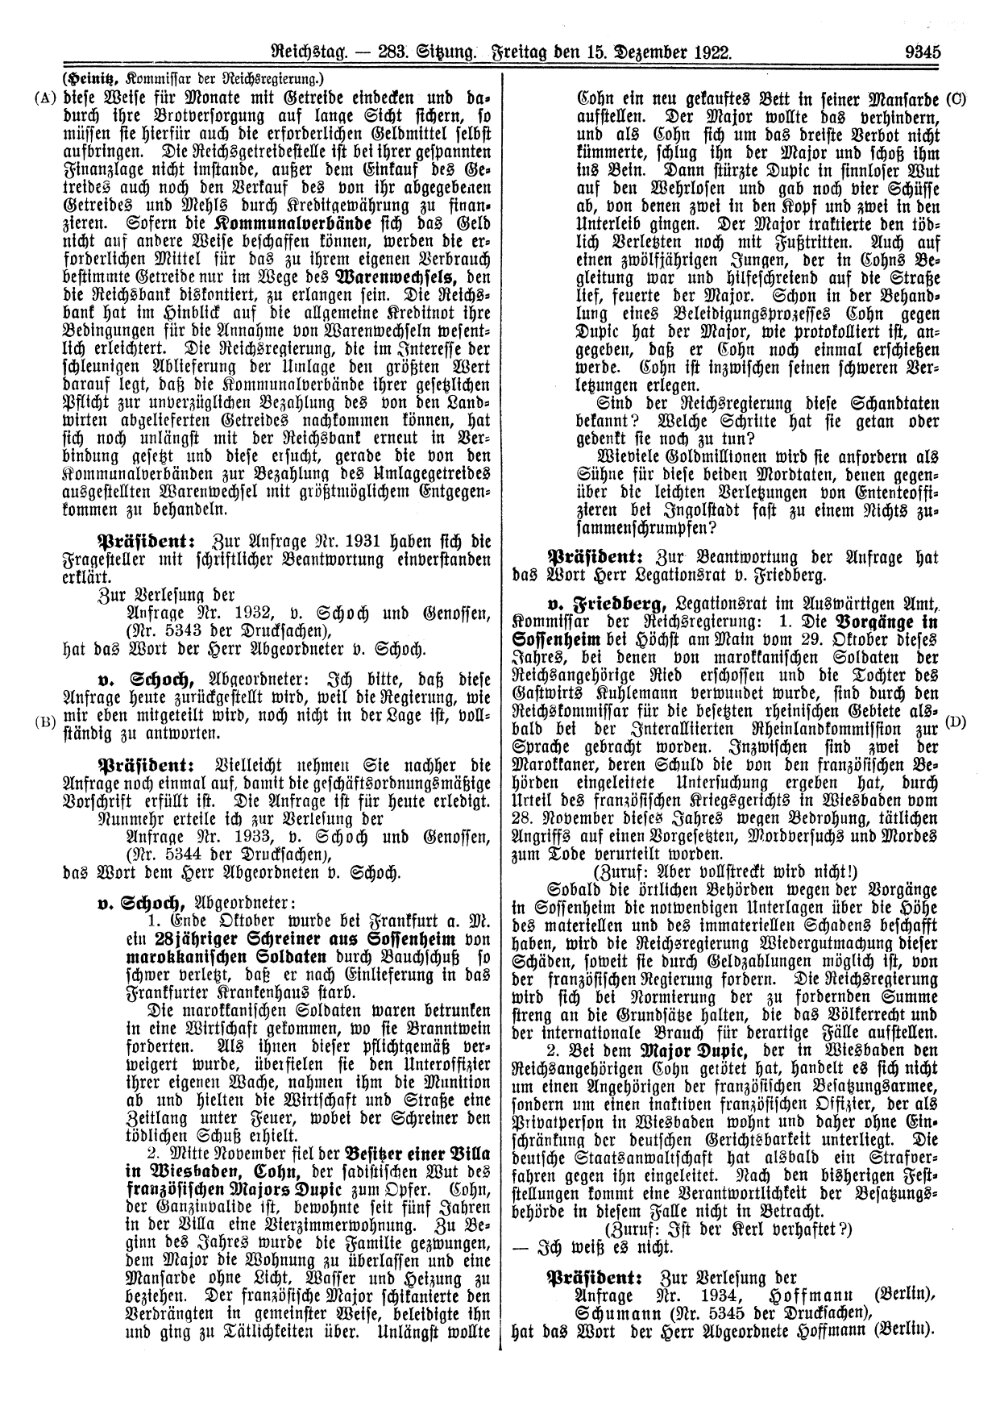 Scan of page 9345